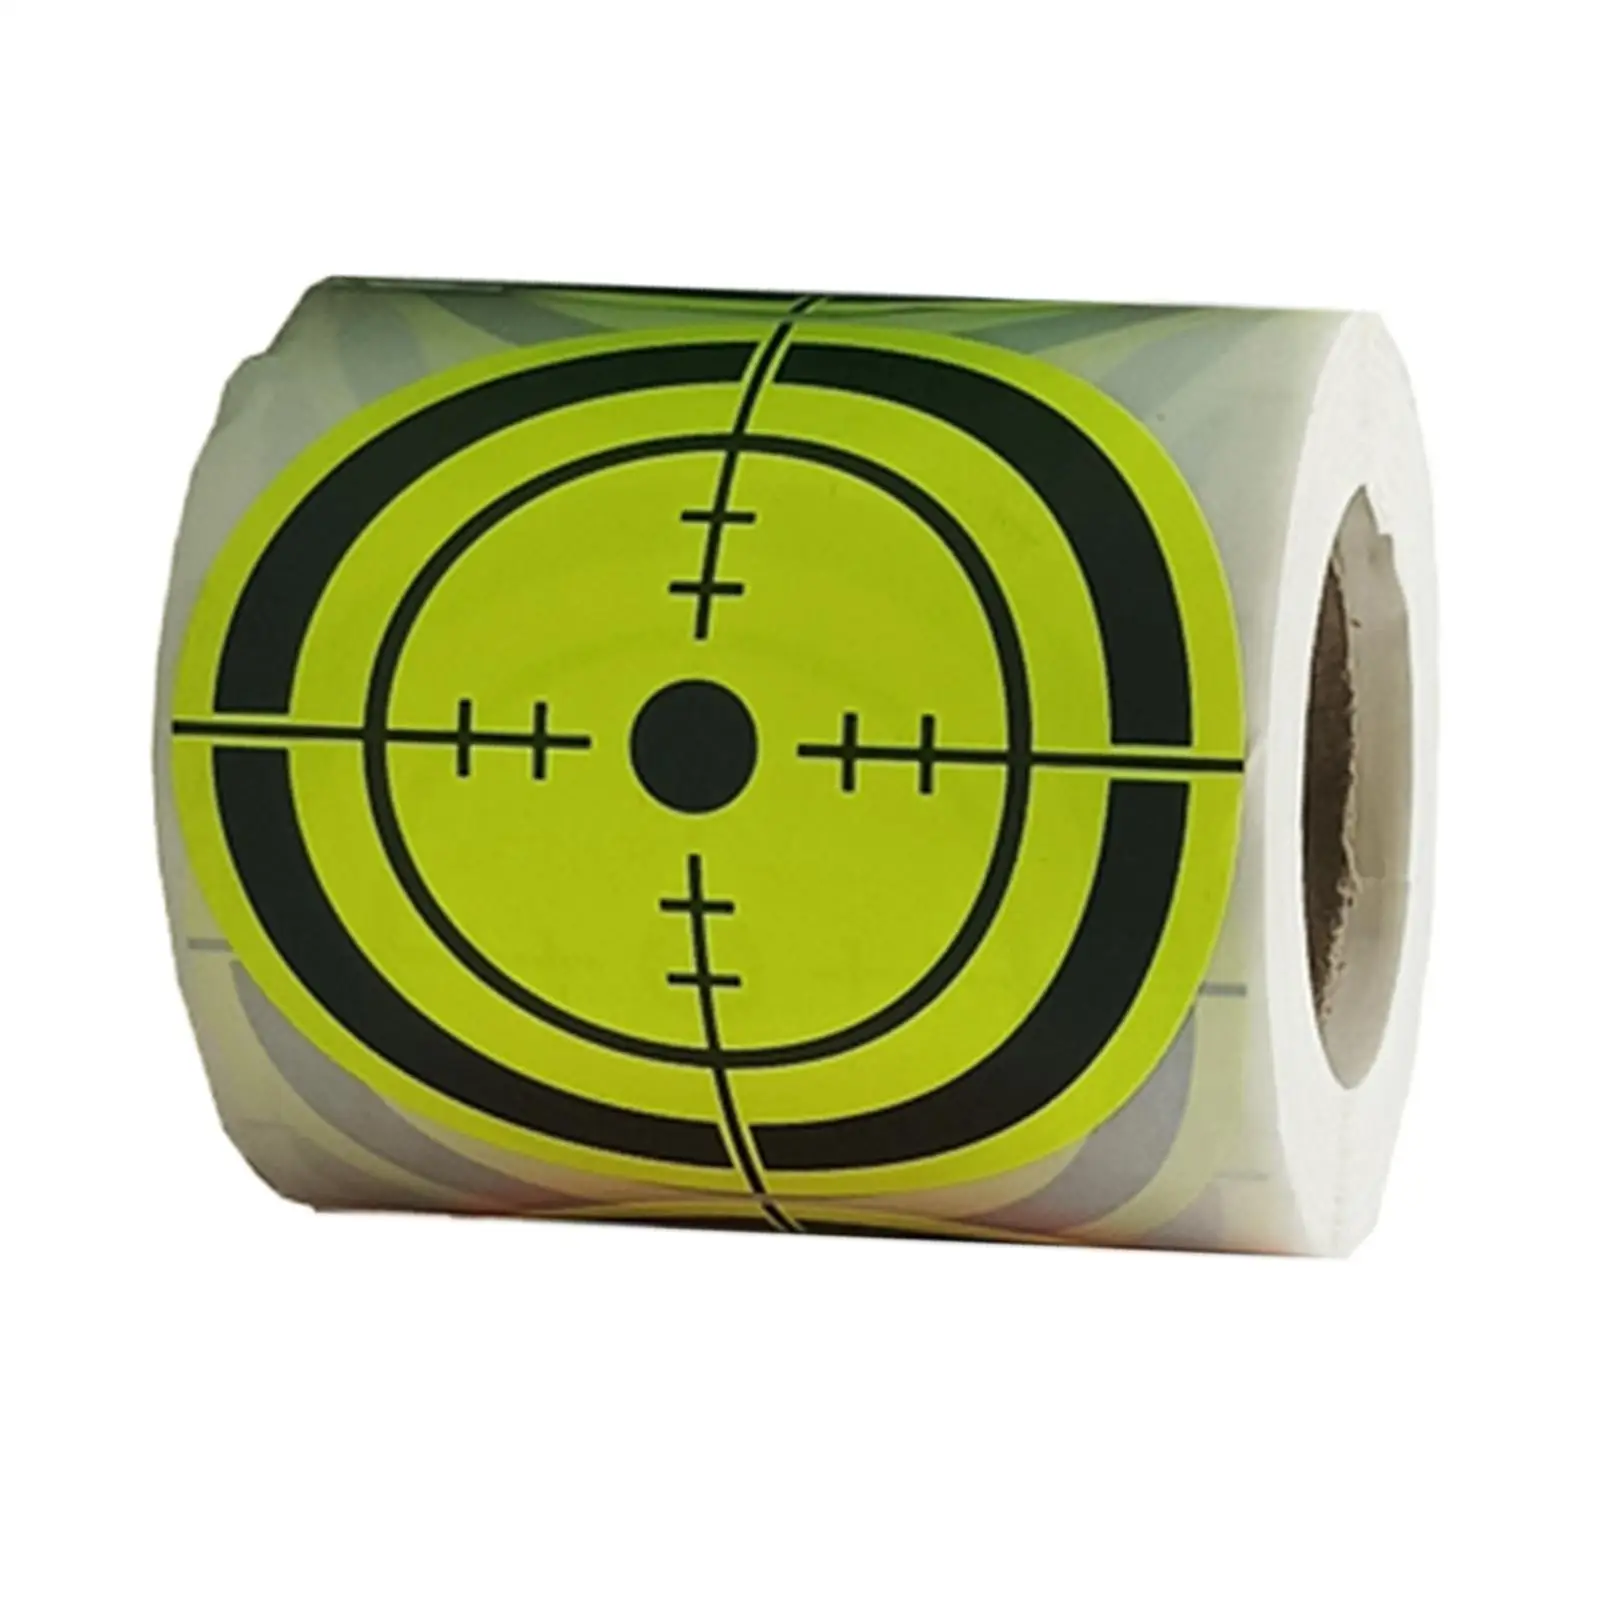 Shooting Targets Self Adhesive Sticker Paper Targets High Visibility